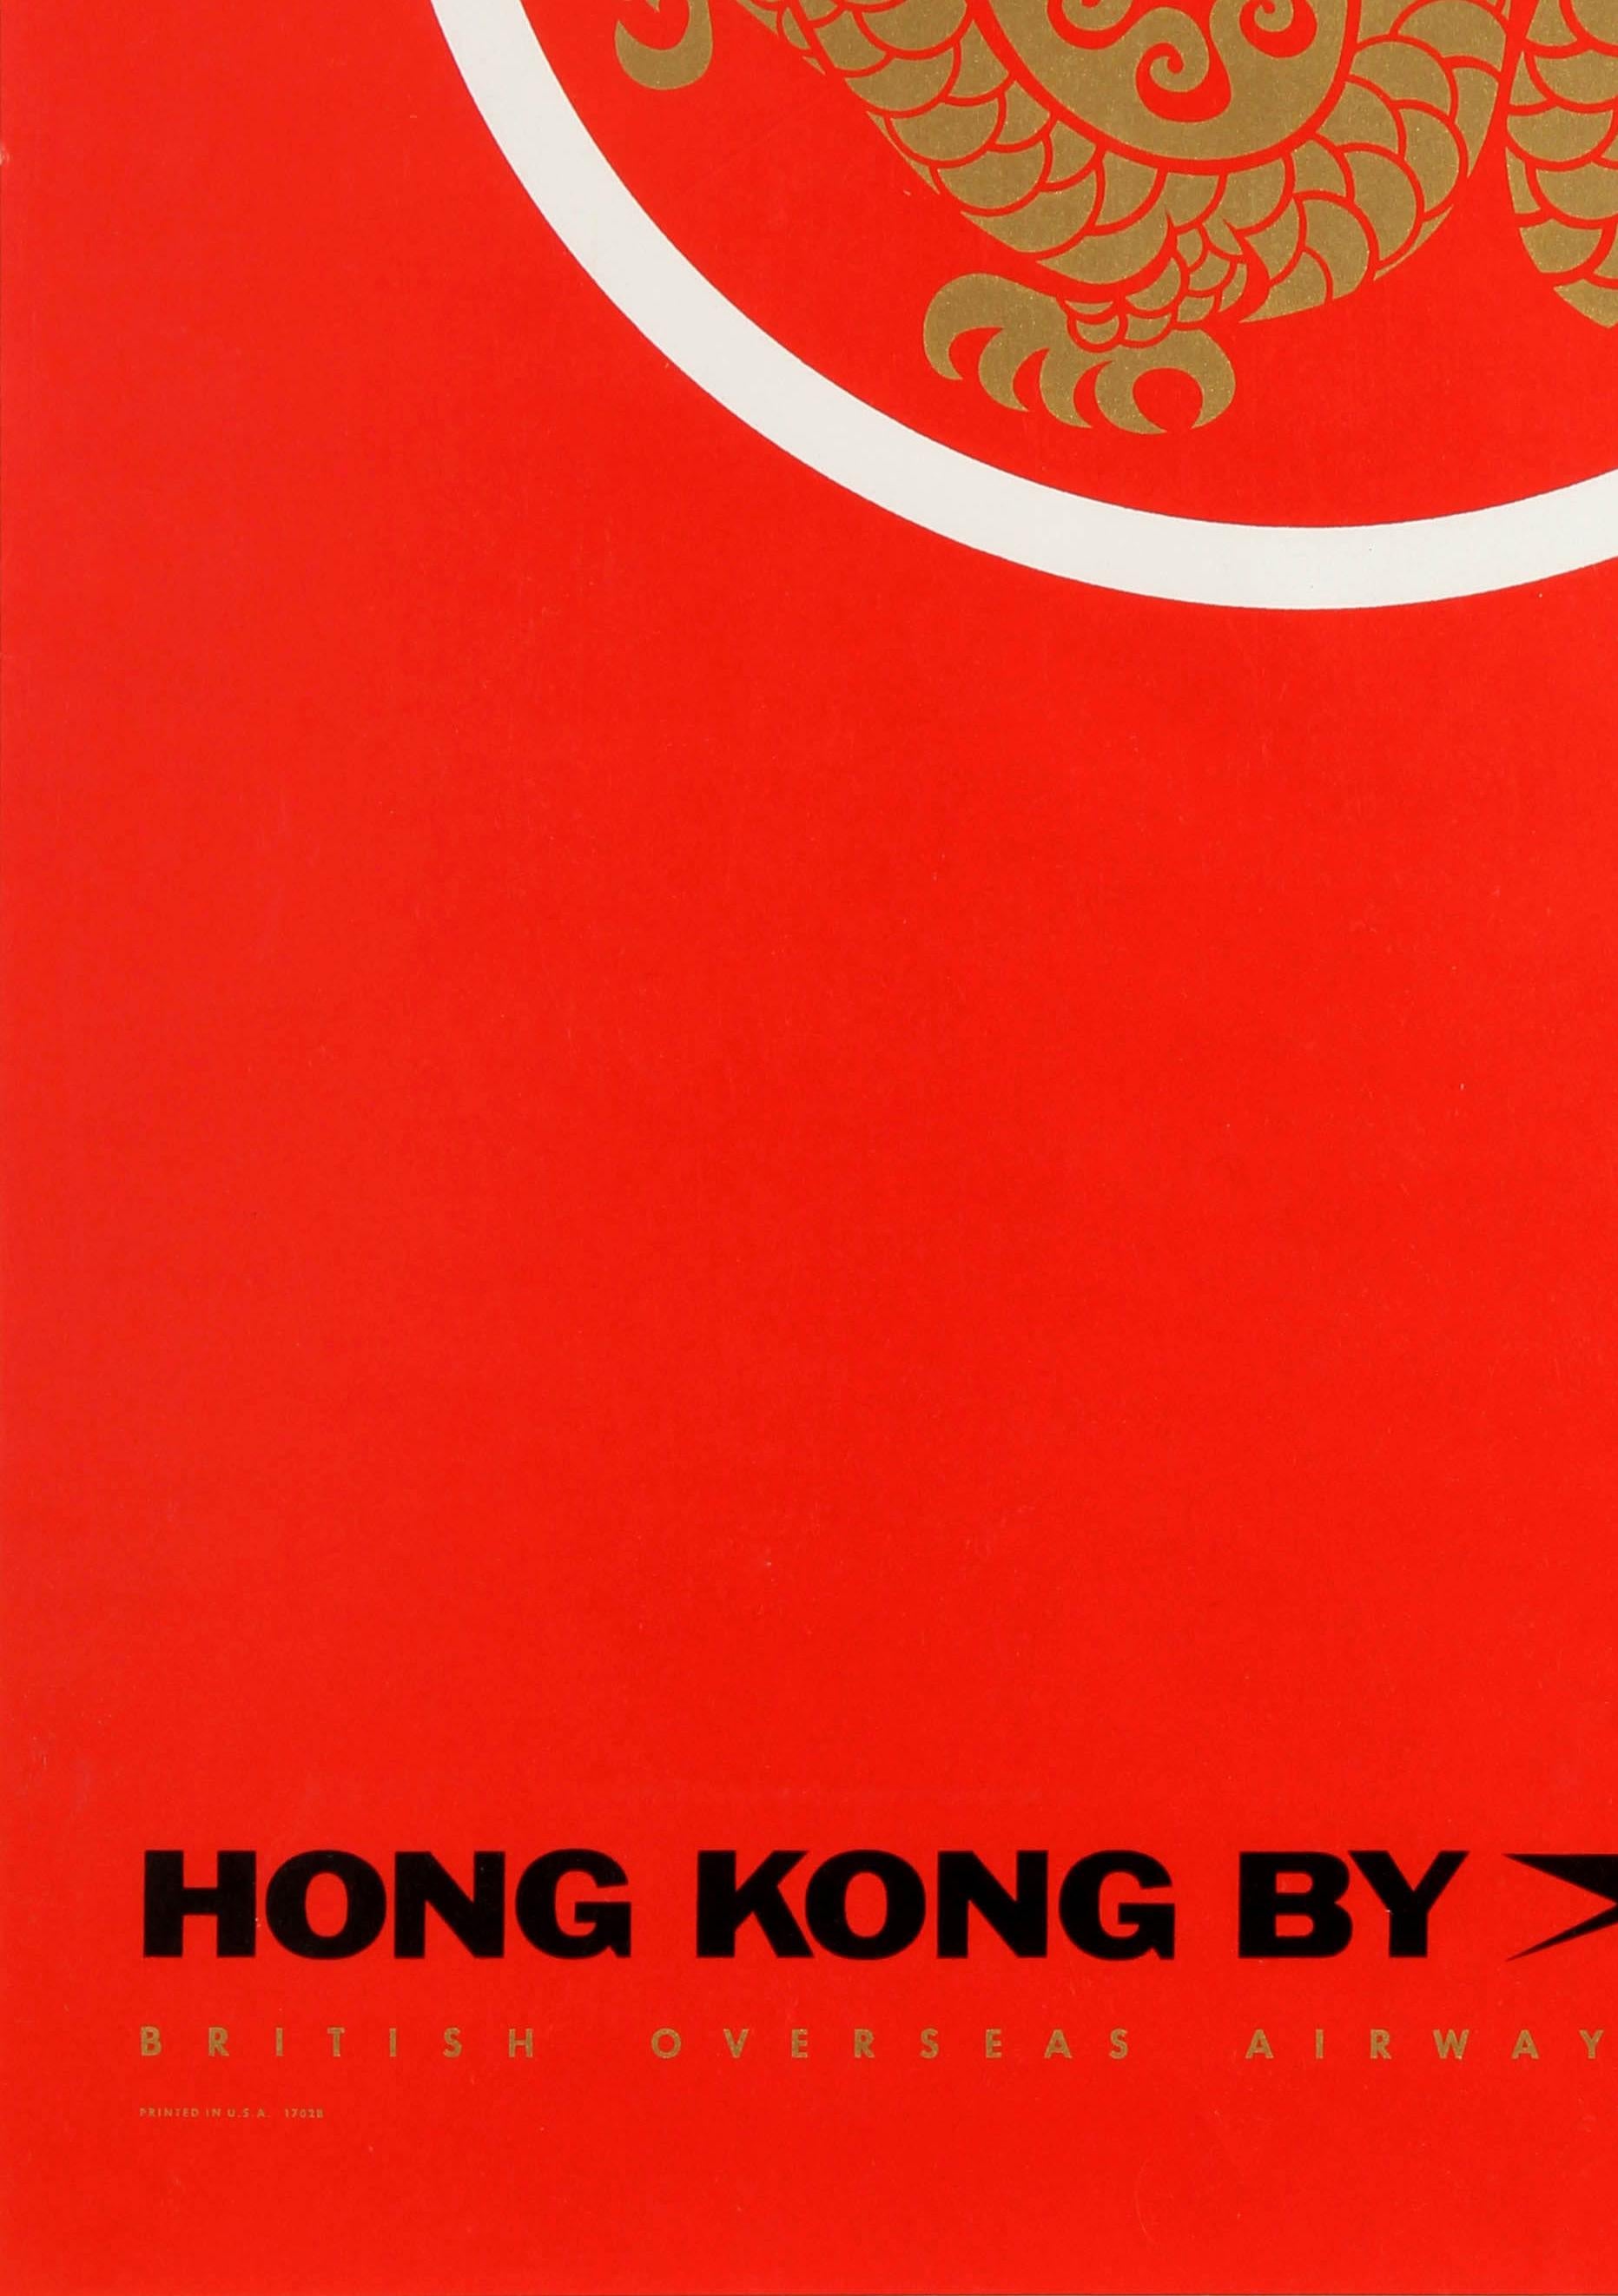 where to buy posters in hong kong